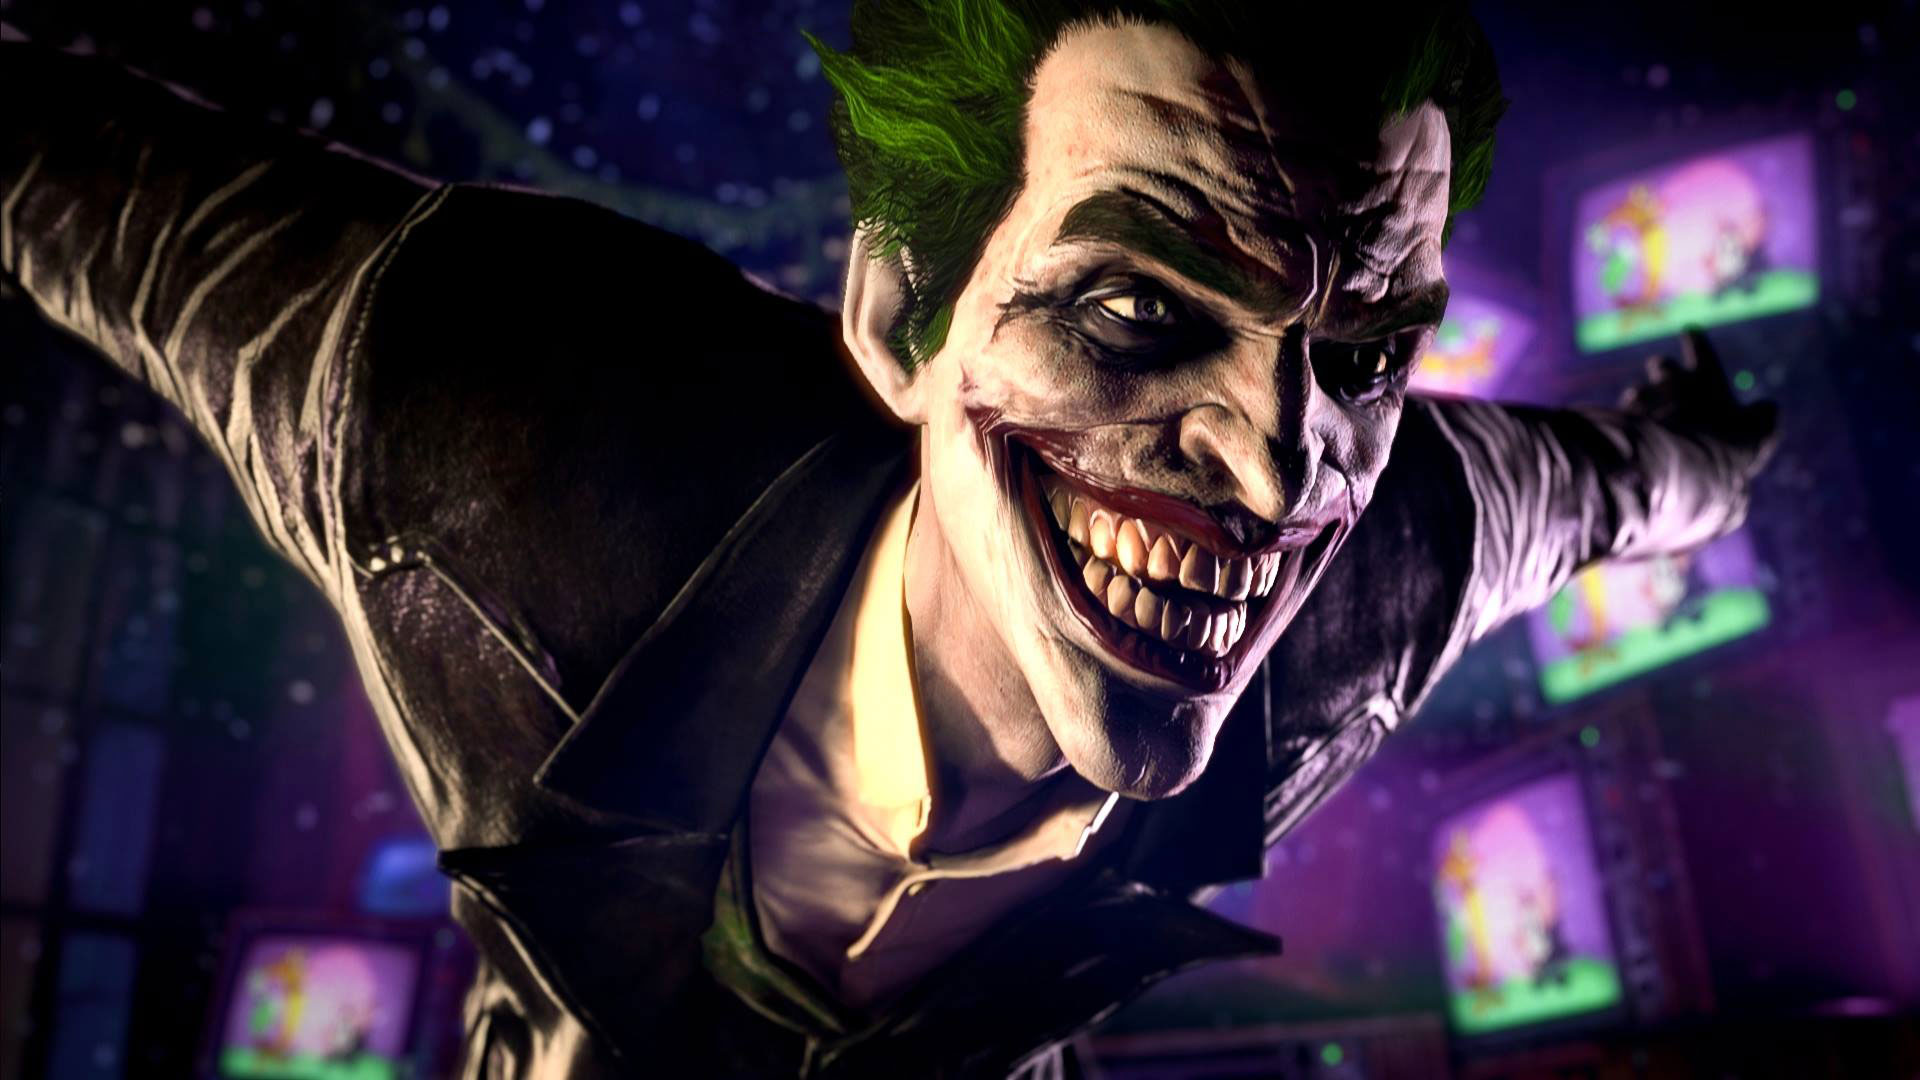 Looking for a Joker wallpaper? Pick one for your desktop background